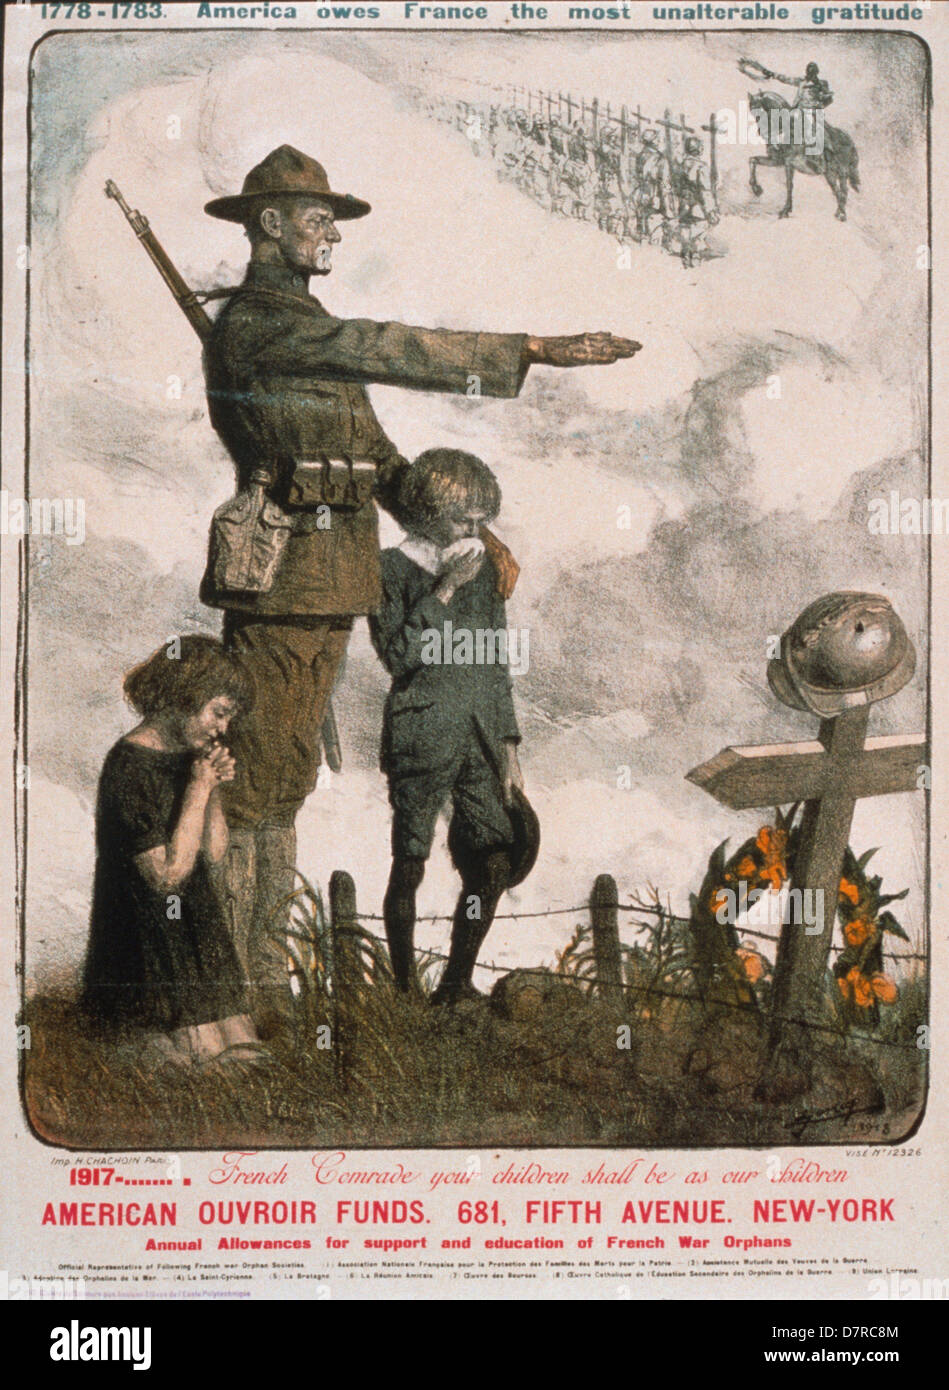 1778-1783 America owes France the most unalterable gratitude. 1917- . . . French comrade, your children shall be as our children Stock Photo